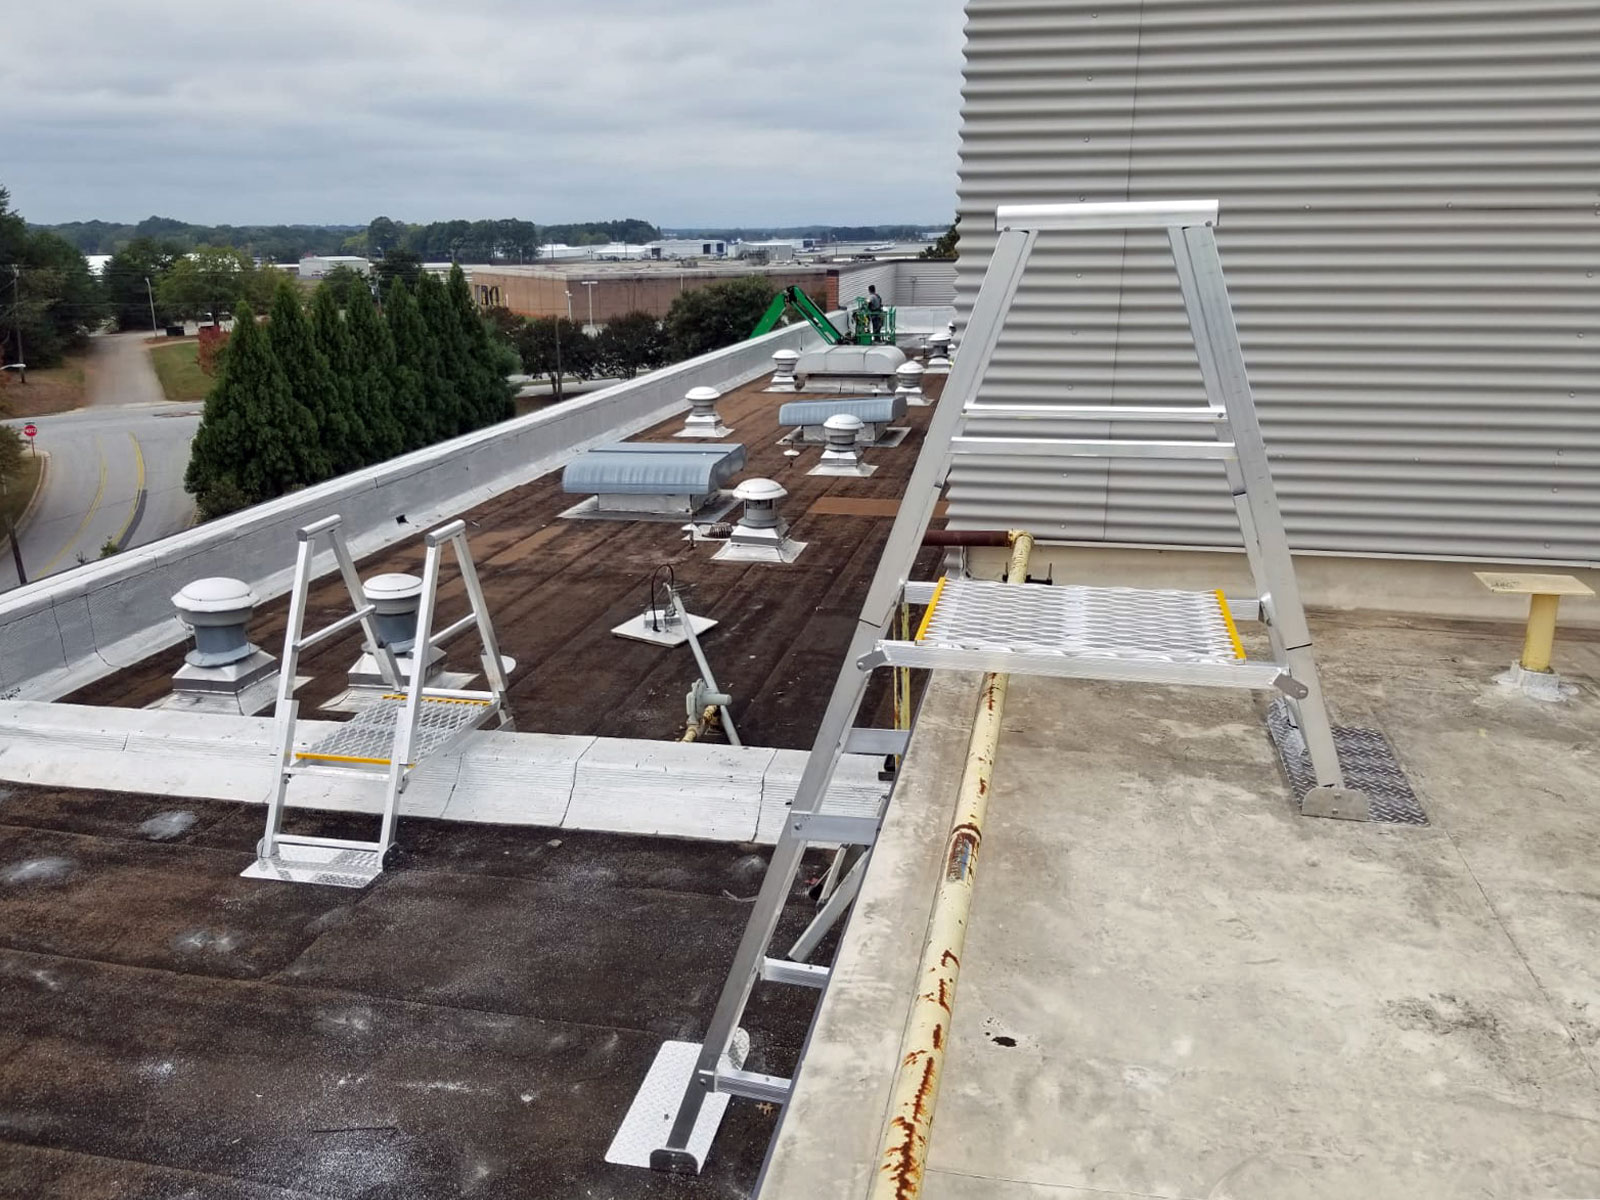 Angled aluminum fixed modular ladders with crossovers for parapet and roof obstructions